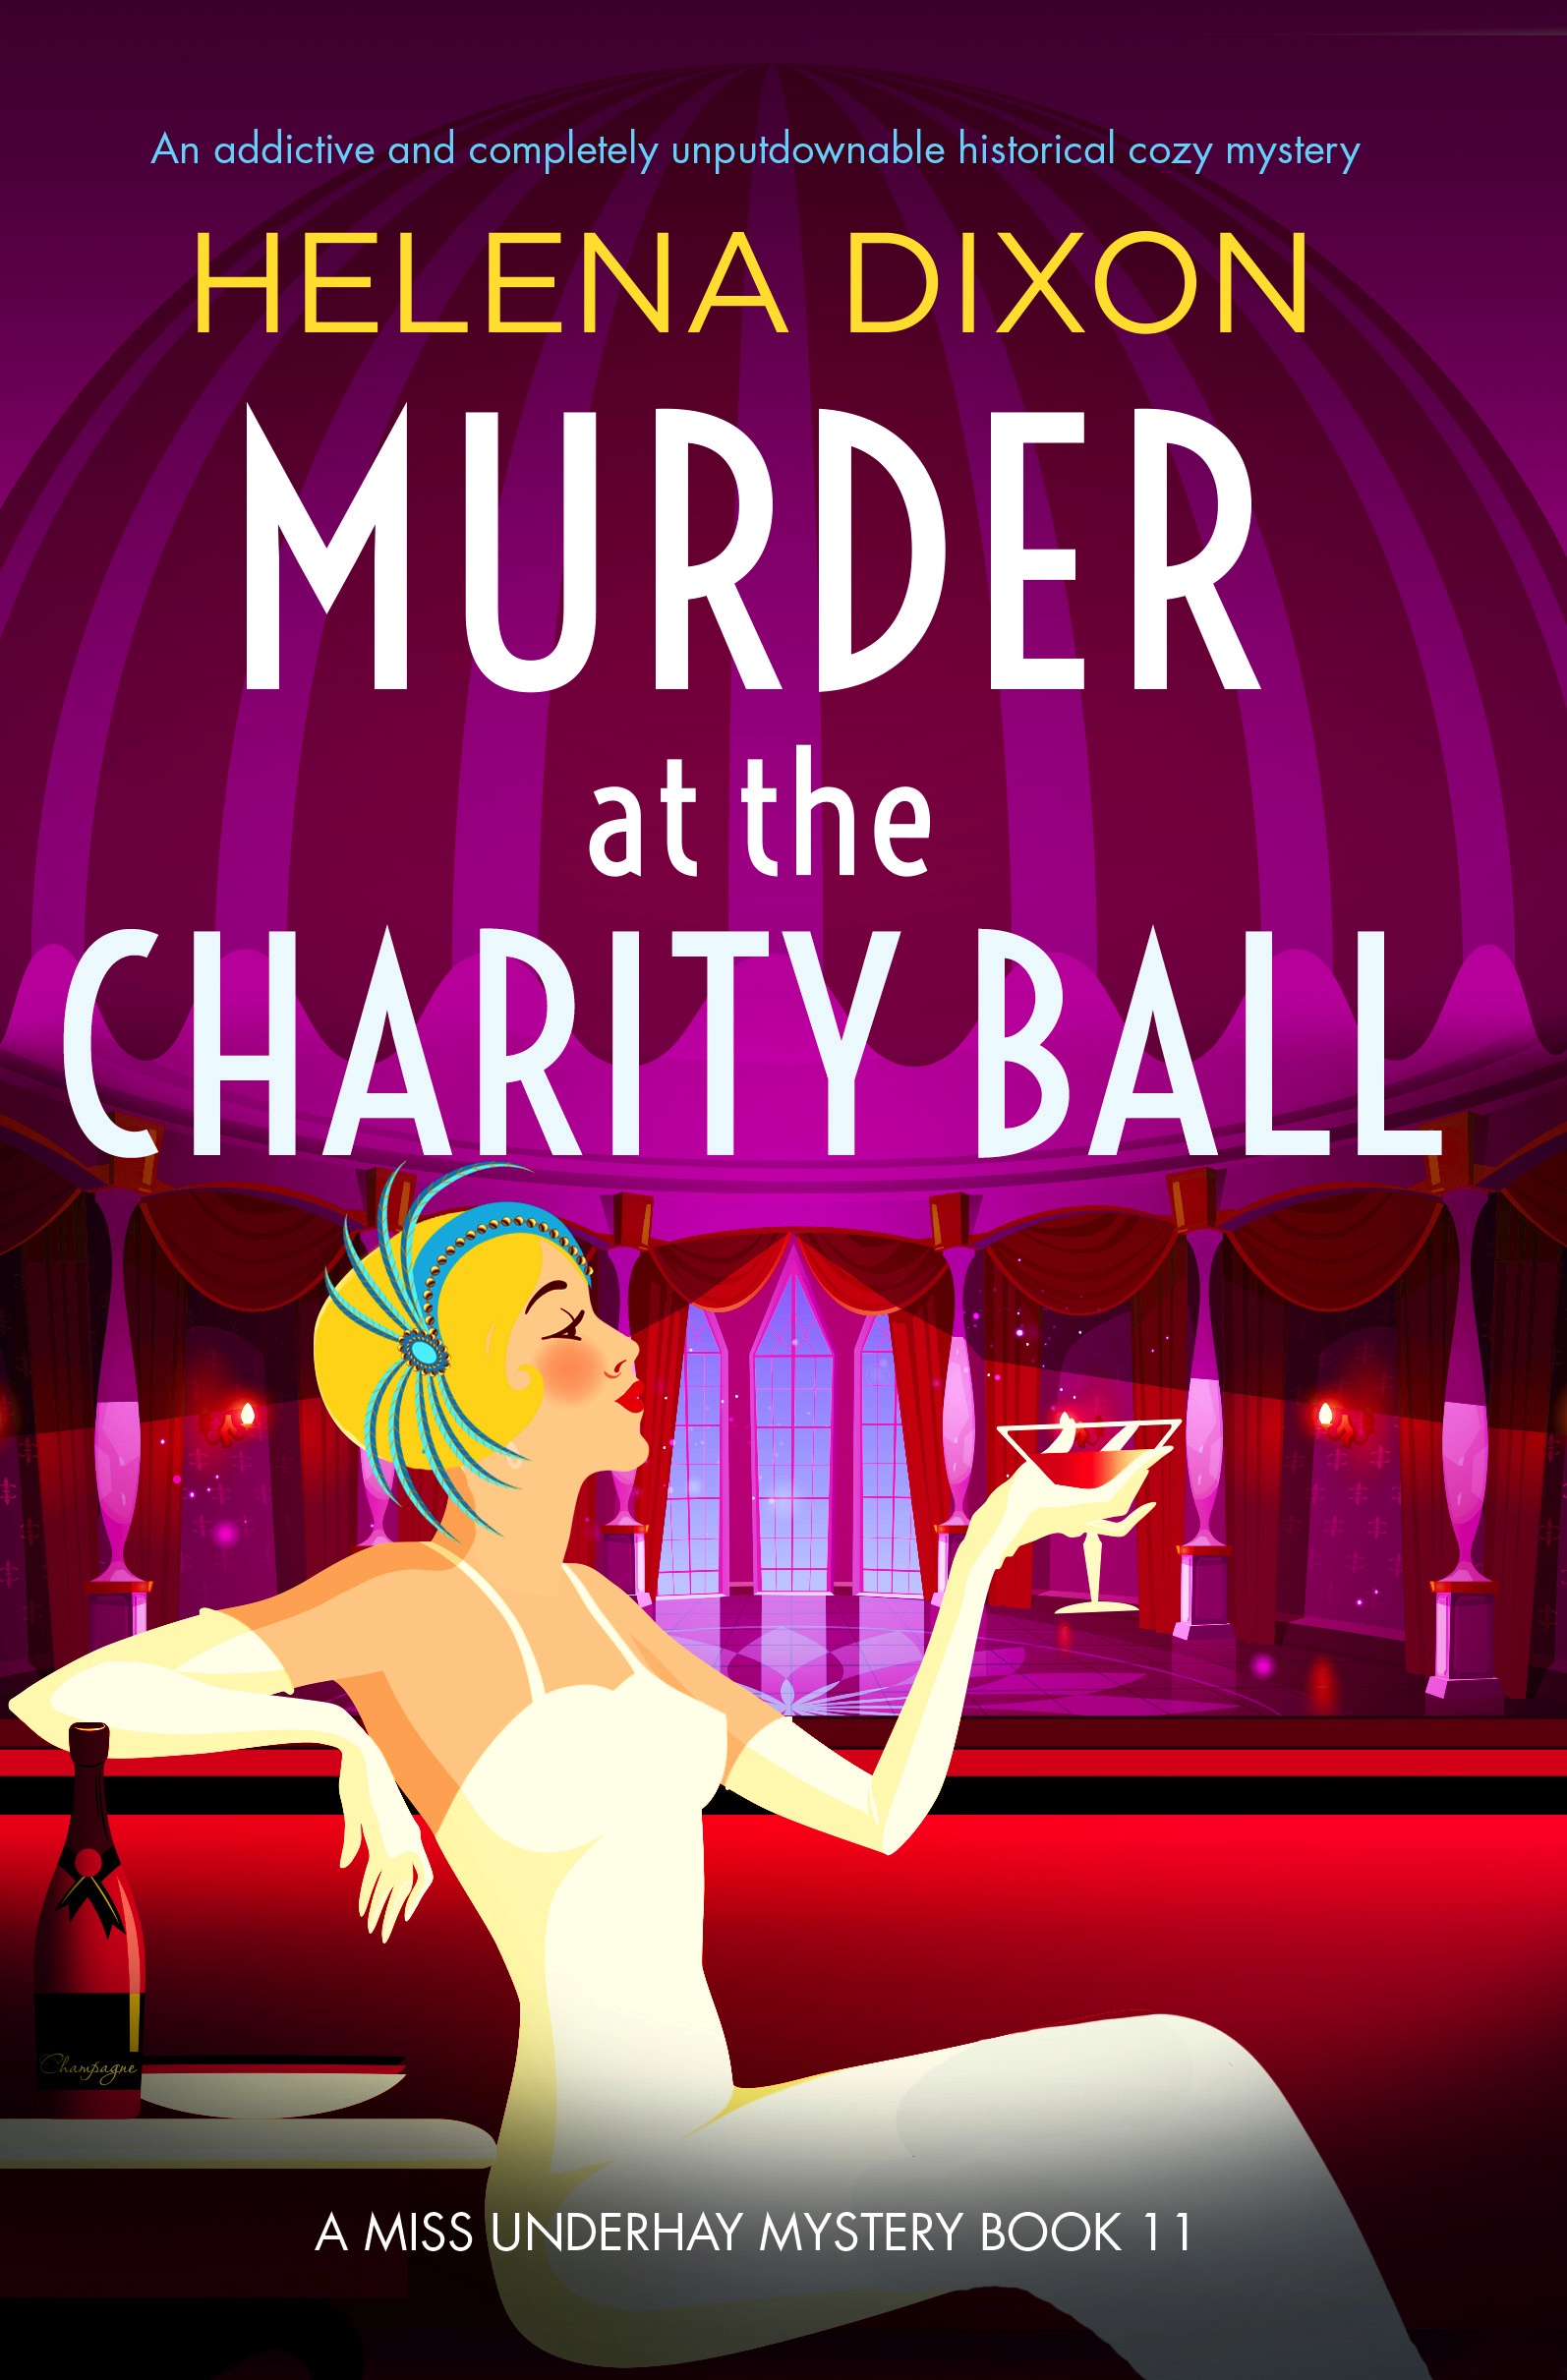 Murder at the Charity Ball book cover